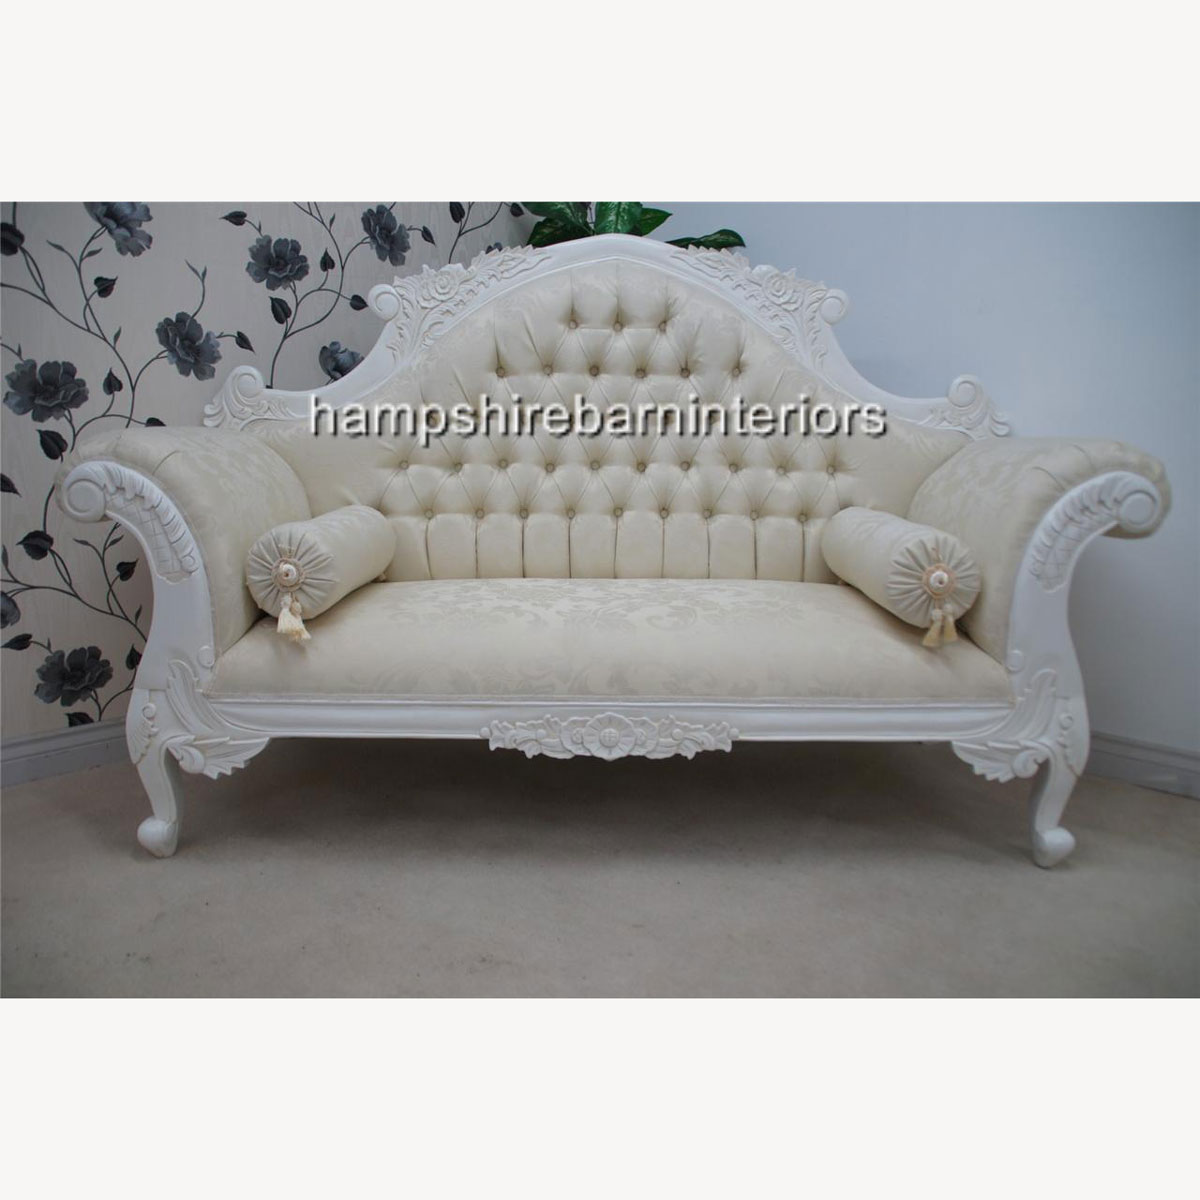 Charles Louis Chaise Cuddler Love Seat Sofa White Finish With Ivory Fabric 1 - Hampshire Barn Interiors - Home - Hampshire Barn Interiors News